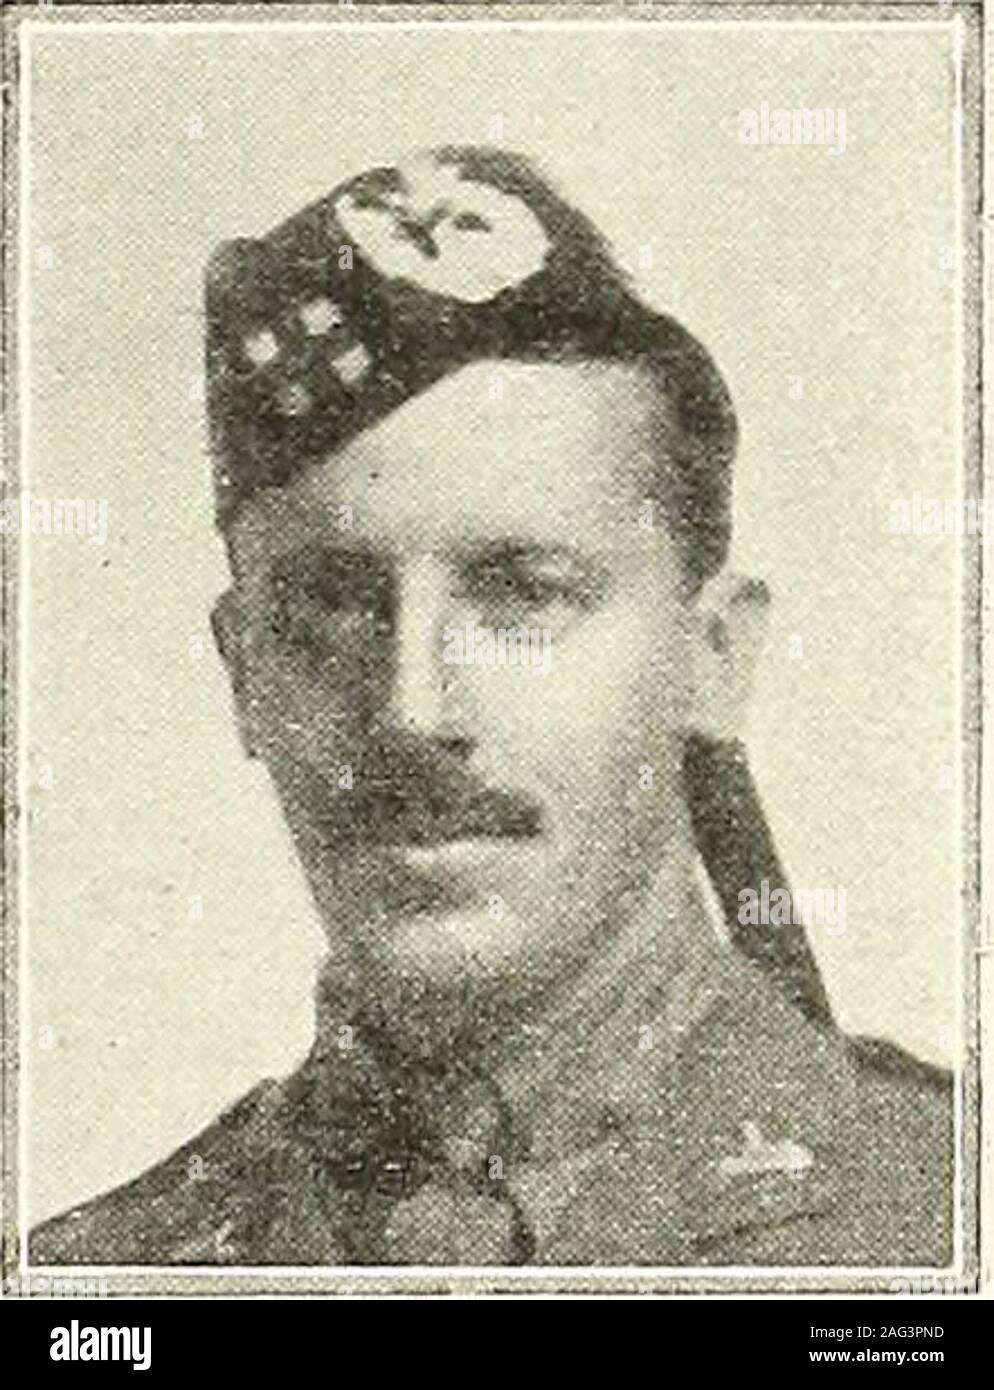 . Roll of service in the Great War, 1914-1919. hrough histraining at Aberdeen, Peterhead and Ripon andcrossed to France in 1916, took part in the earlySomme Battles and was killed in action at Beau-mont-Hamel, 13 November 1916. GILLIES, JAMES BROWN : Major, 4thBattalion Gordon Highlanders ; son of T. R. Gillies, advocate inAberdeen ; born Aber-deen, 29 July 1886 ;educated at the Gram-mar School; matricu-lated, 1904; B.L.,1908; served his ap-prenticeship withMessrs. C. & P. H.Chalmers, Advocates,and Messrs. Tods,Murray & Jamieson,W.S., Edinburgh;member of the Society of Advocates in Aberdeen an Stock Photo